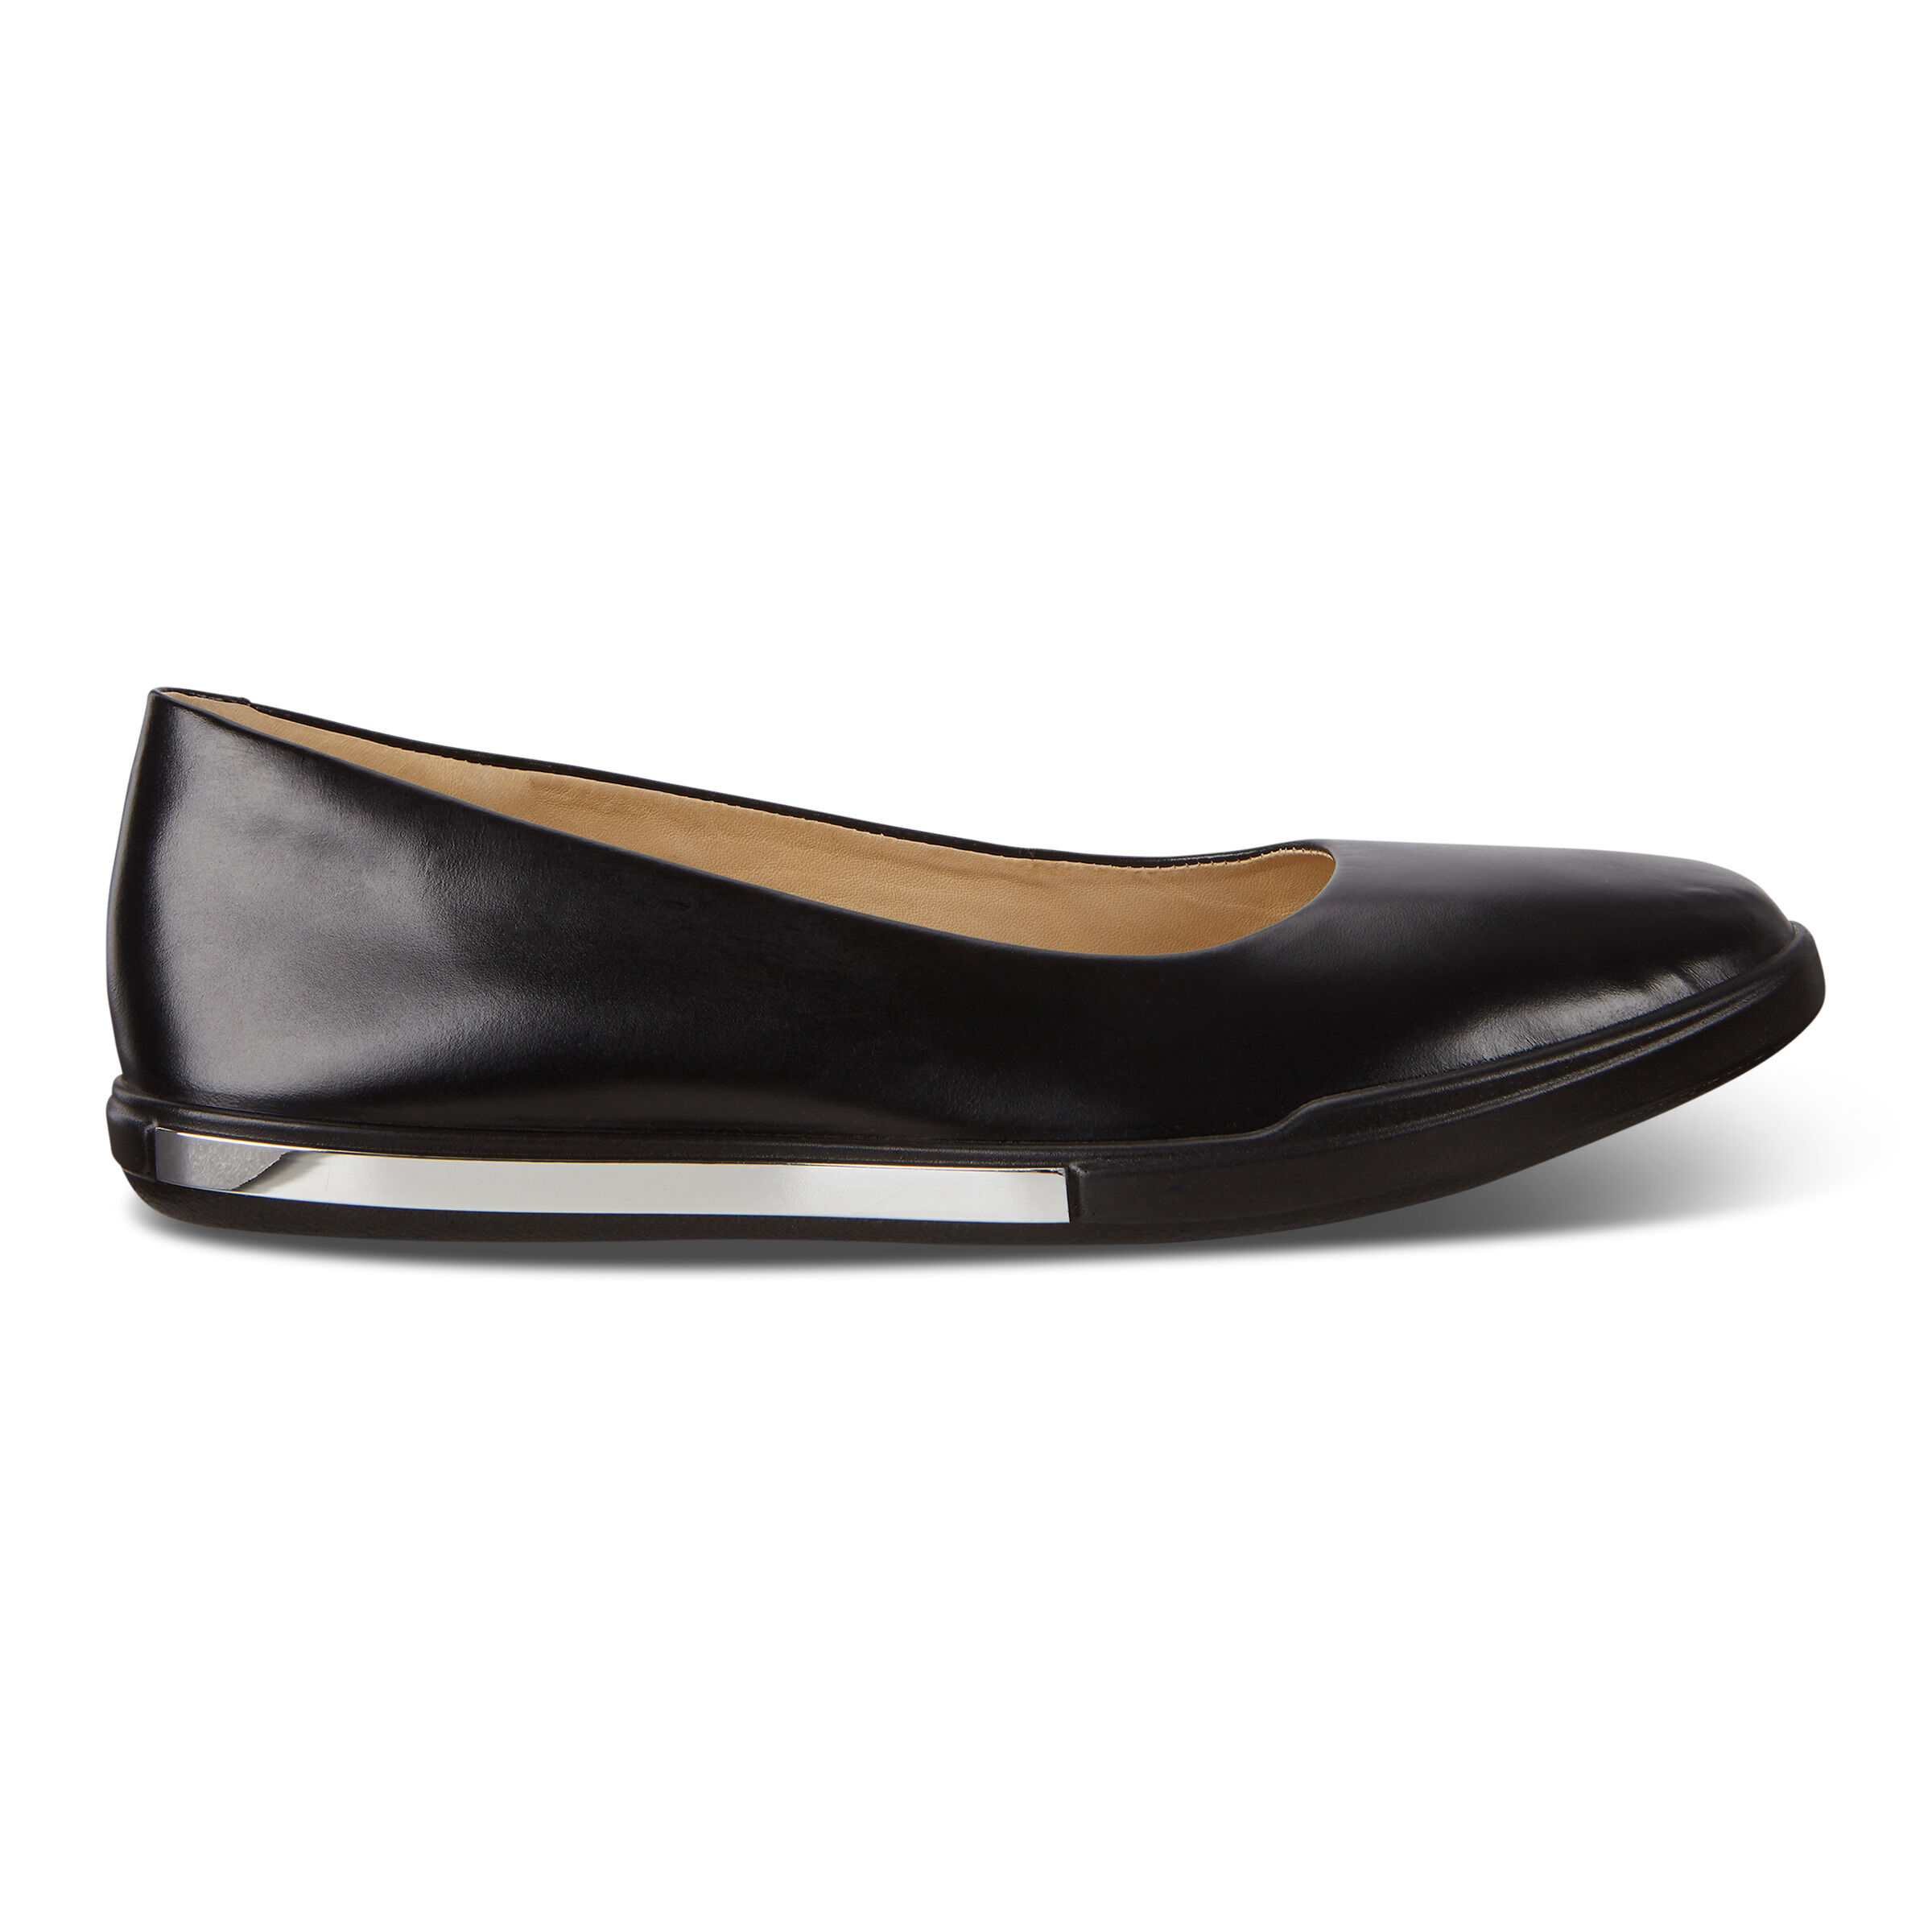 ecco patent leather flats